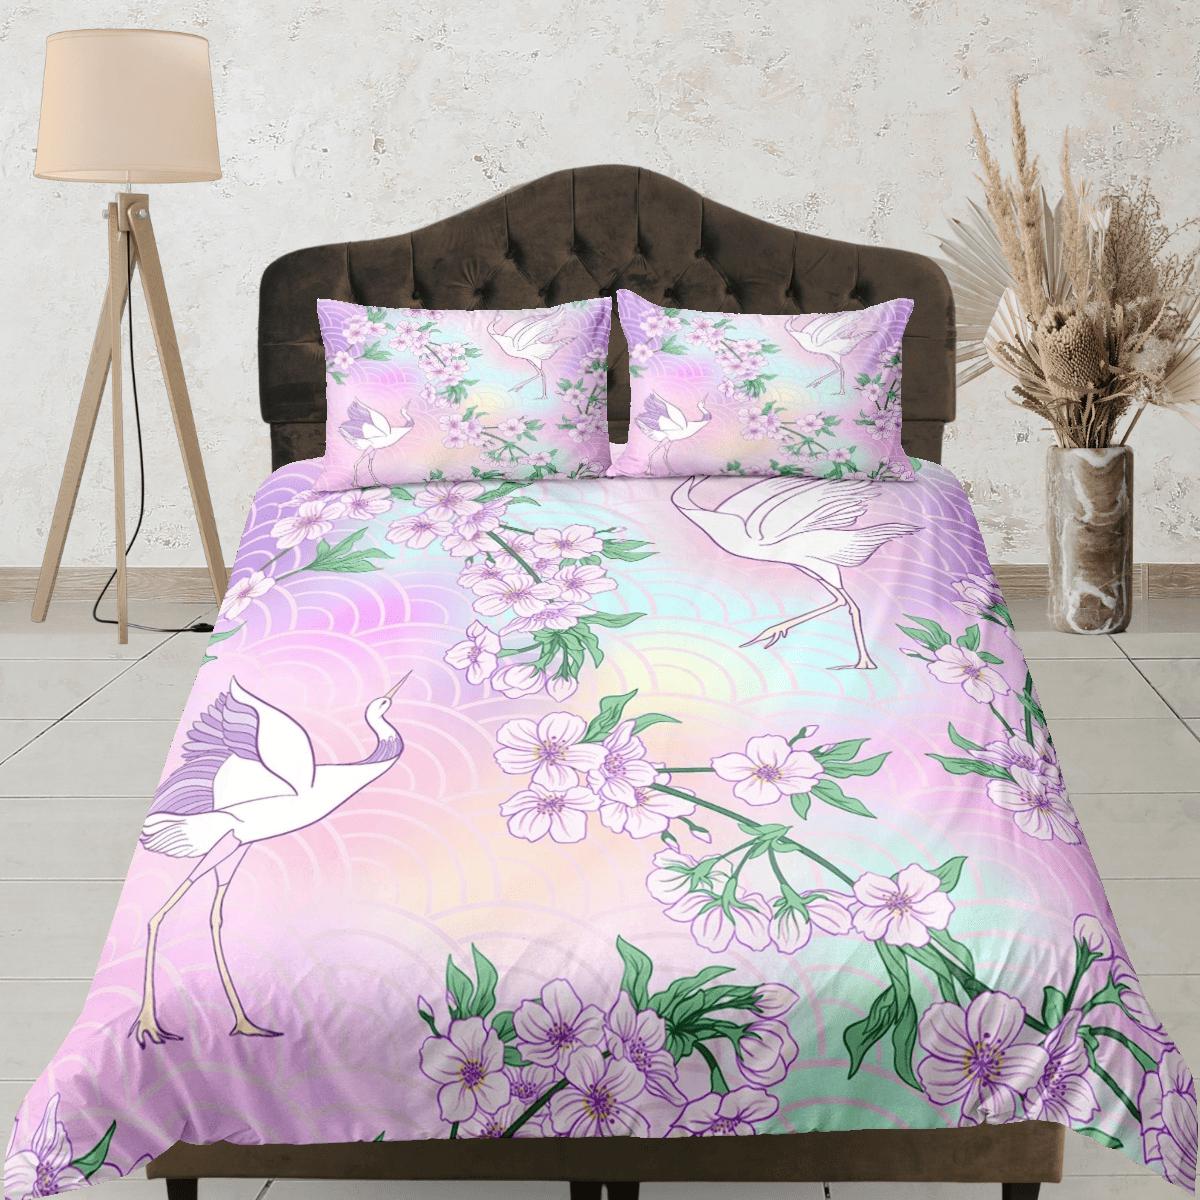 daintyduvet Pastel colors oriental bedding, crane bird and cherry blossoms on japanese duvet cover set for king, queen, full, twin, single, toddler bed